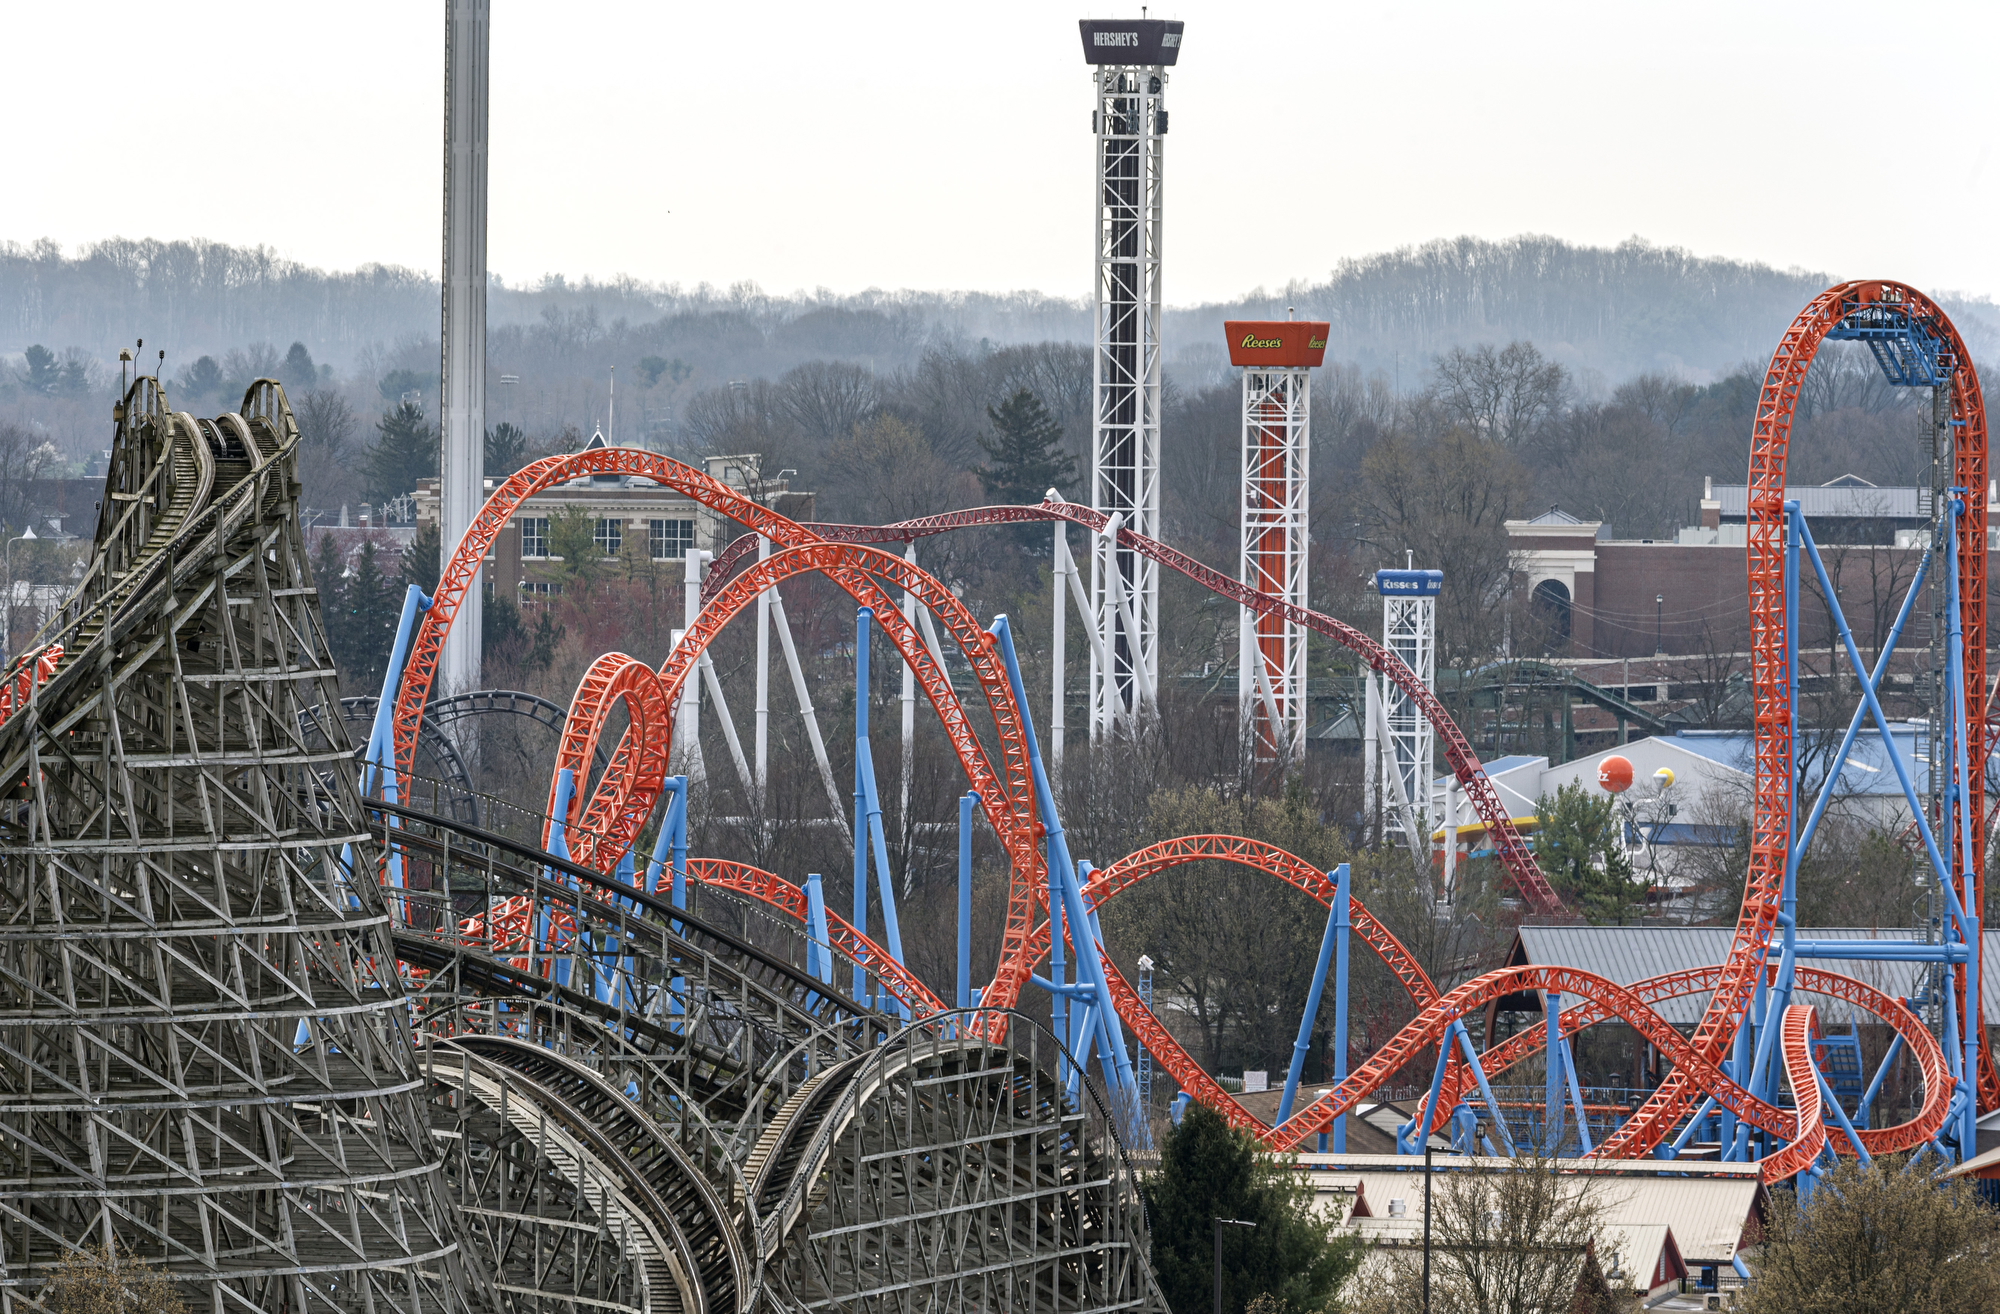 When will Hersheypark open? Here’s what we know